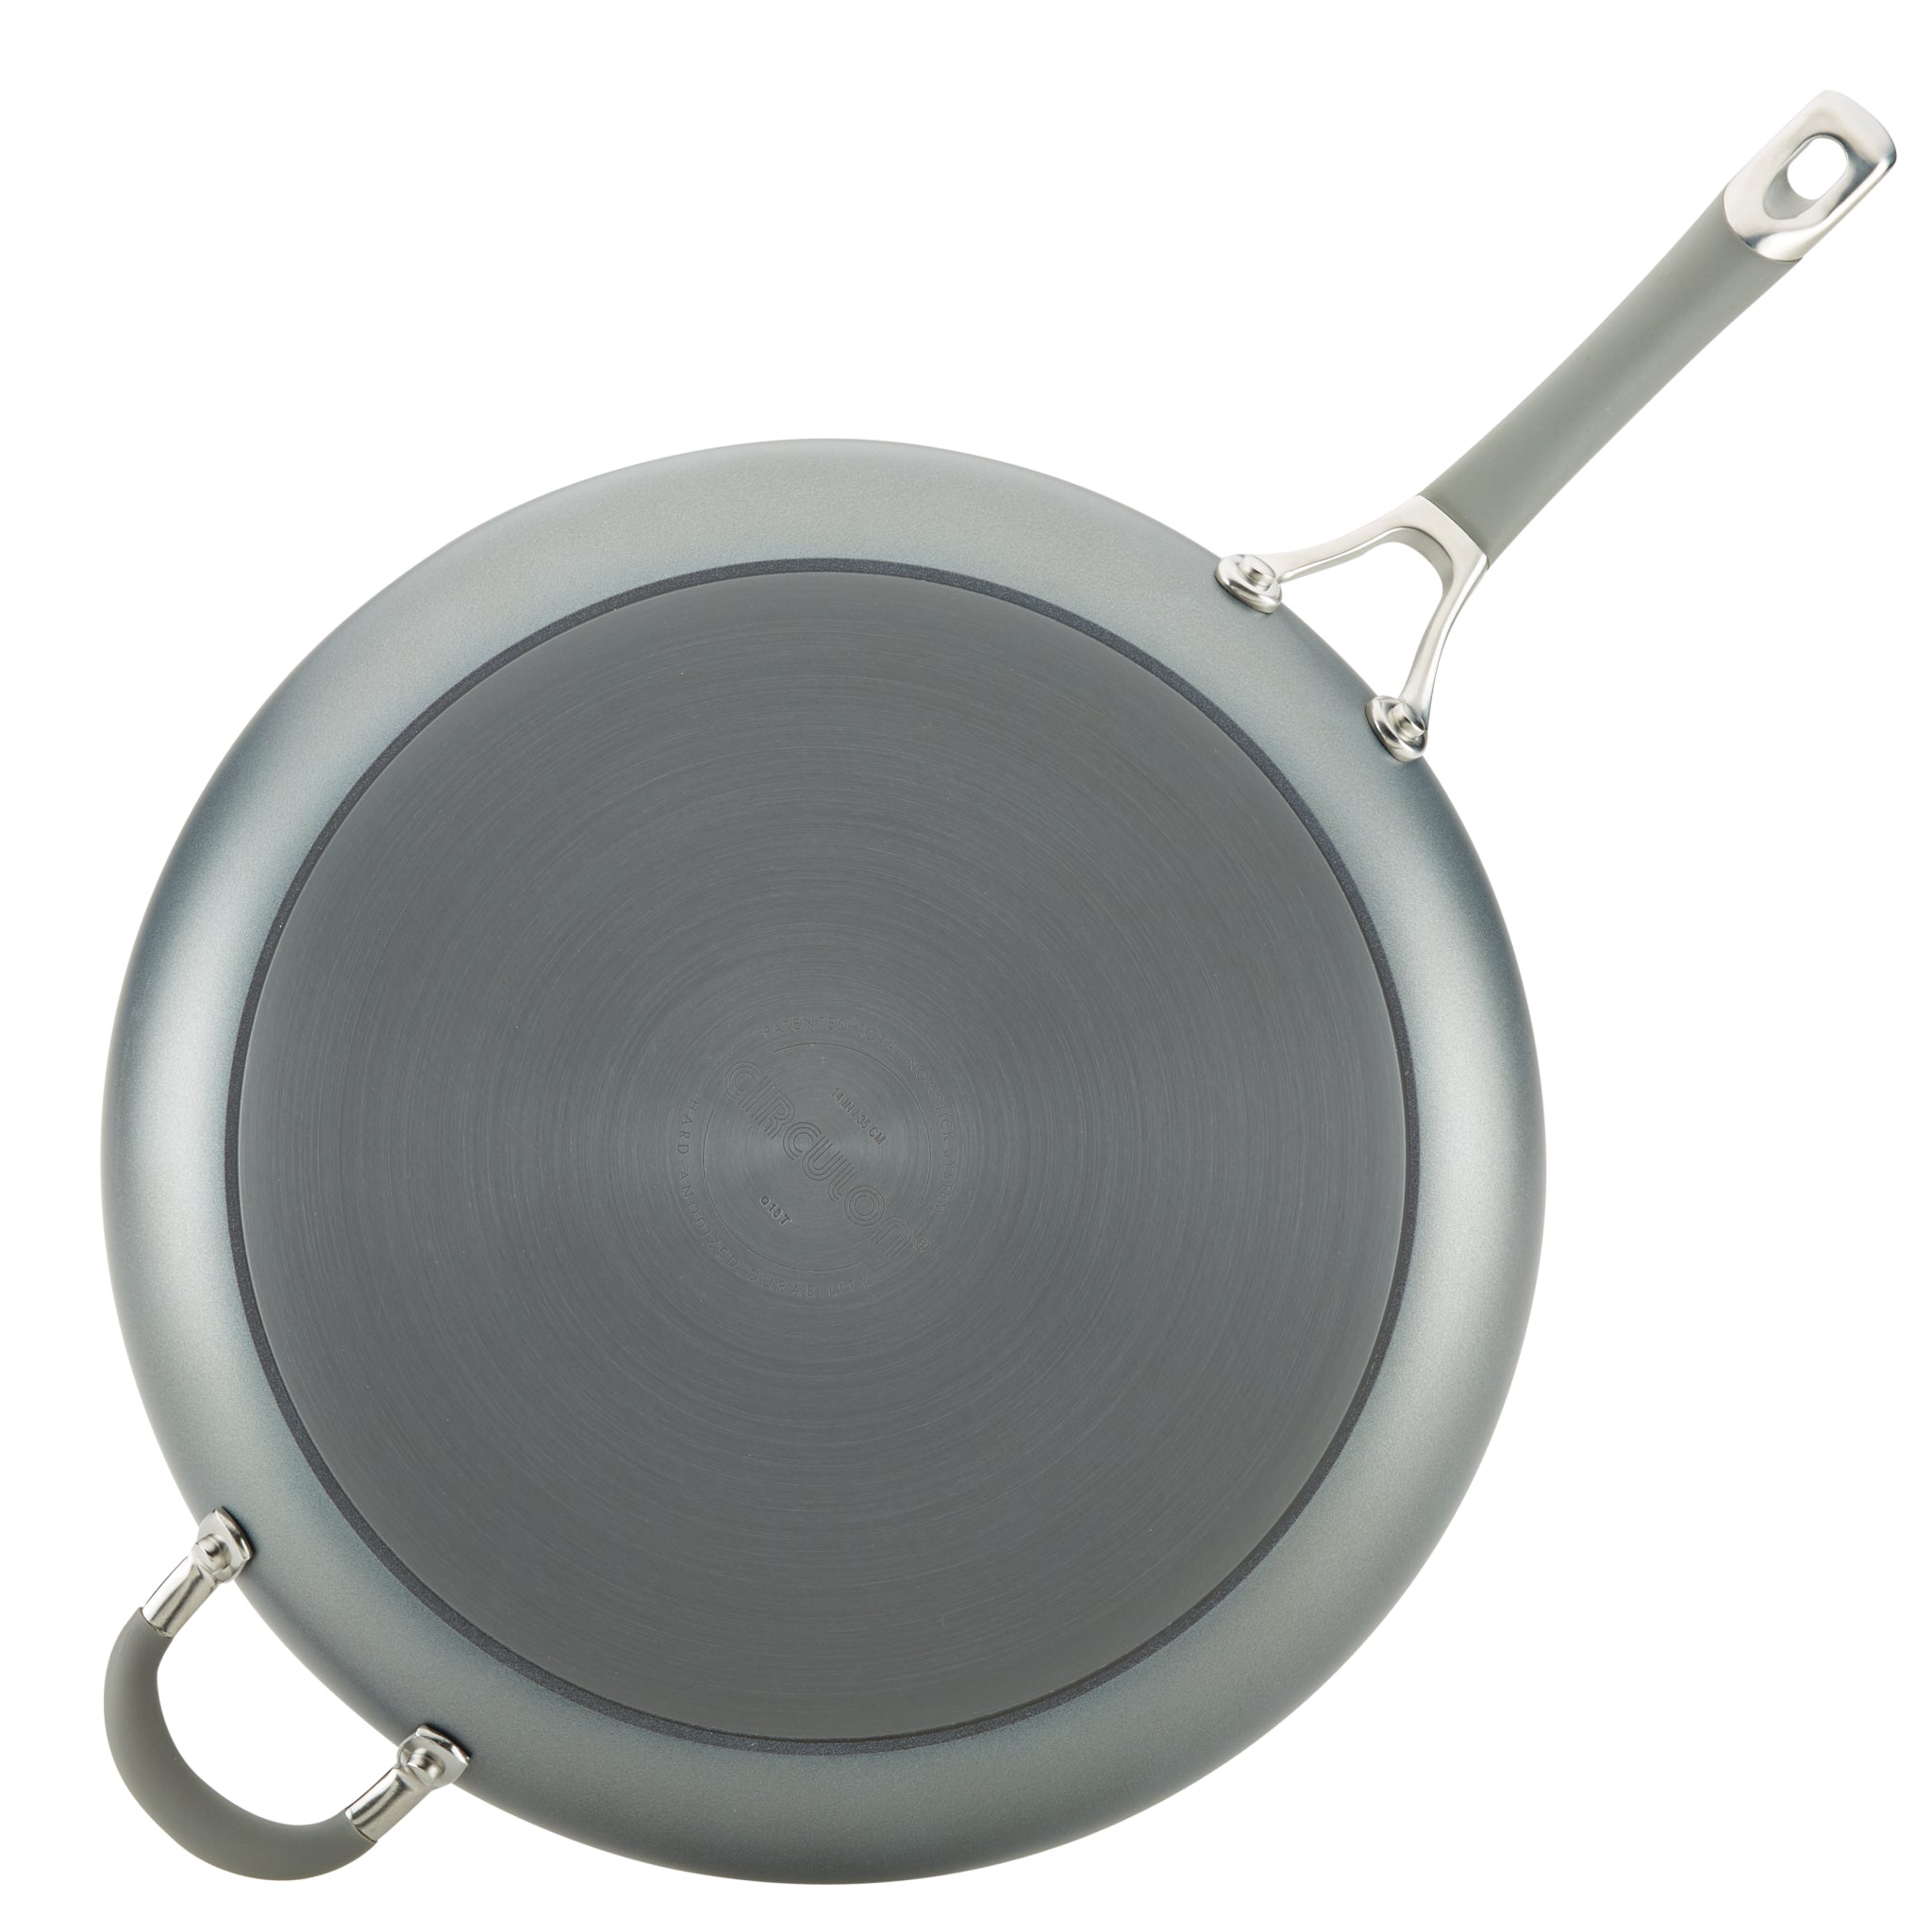 Circulon 14 Round Grill Pan With Side Handles